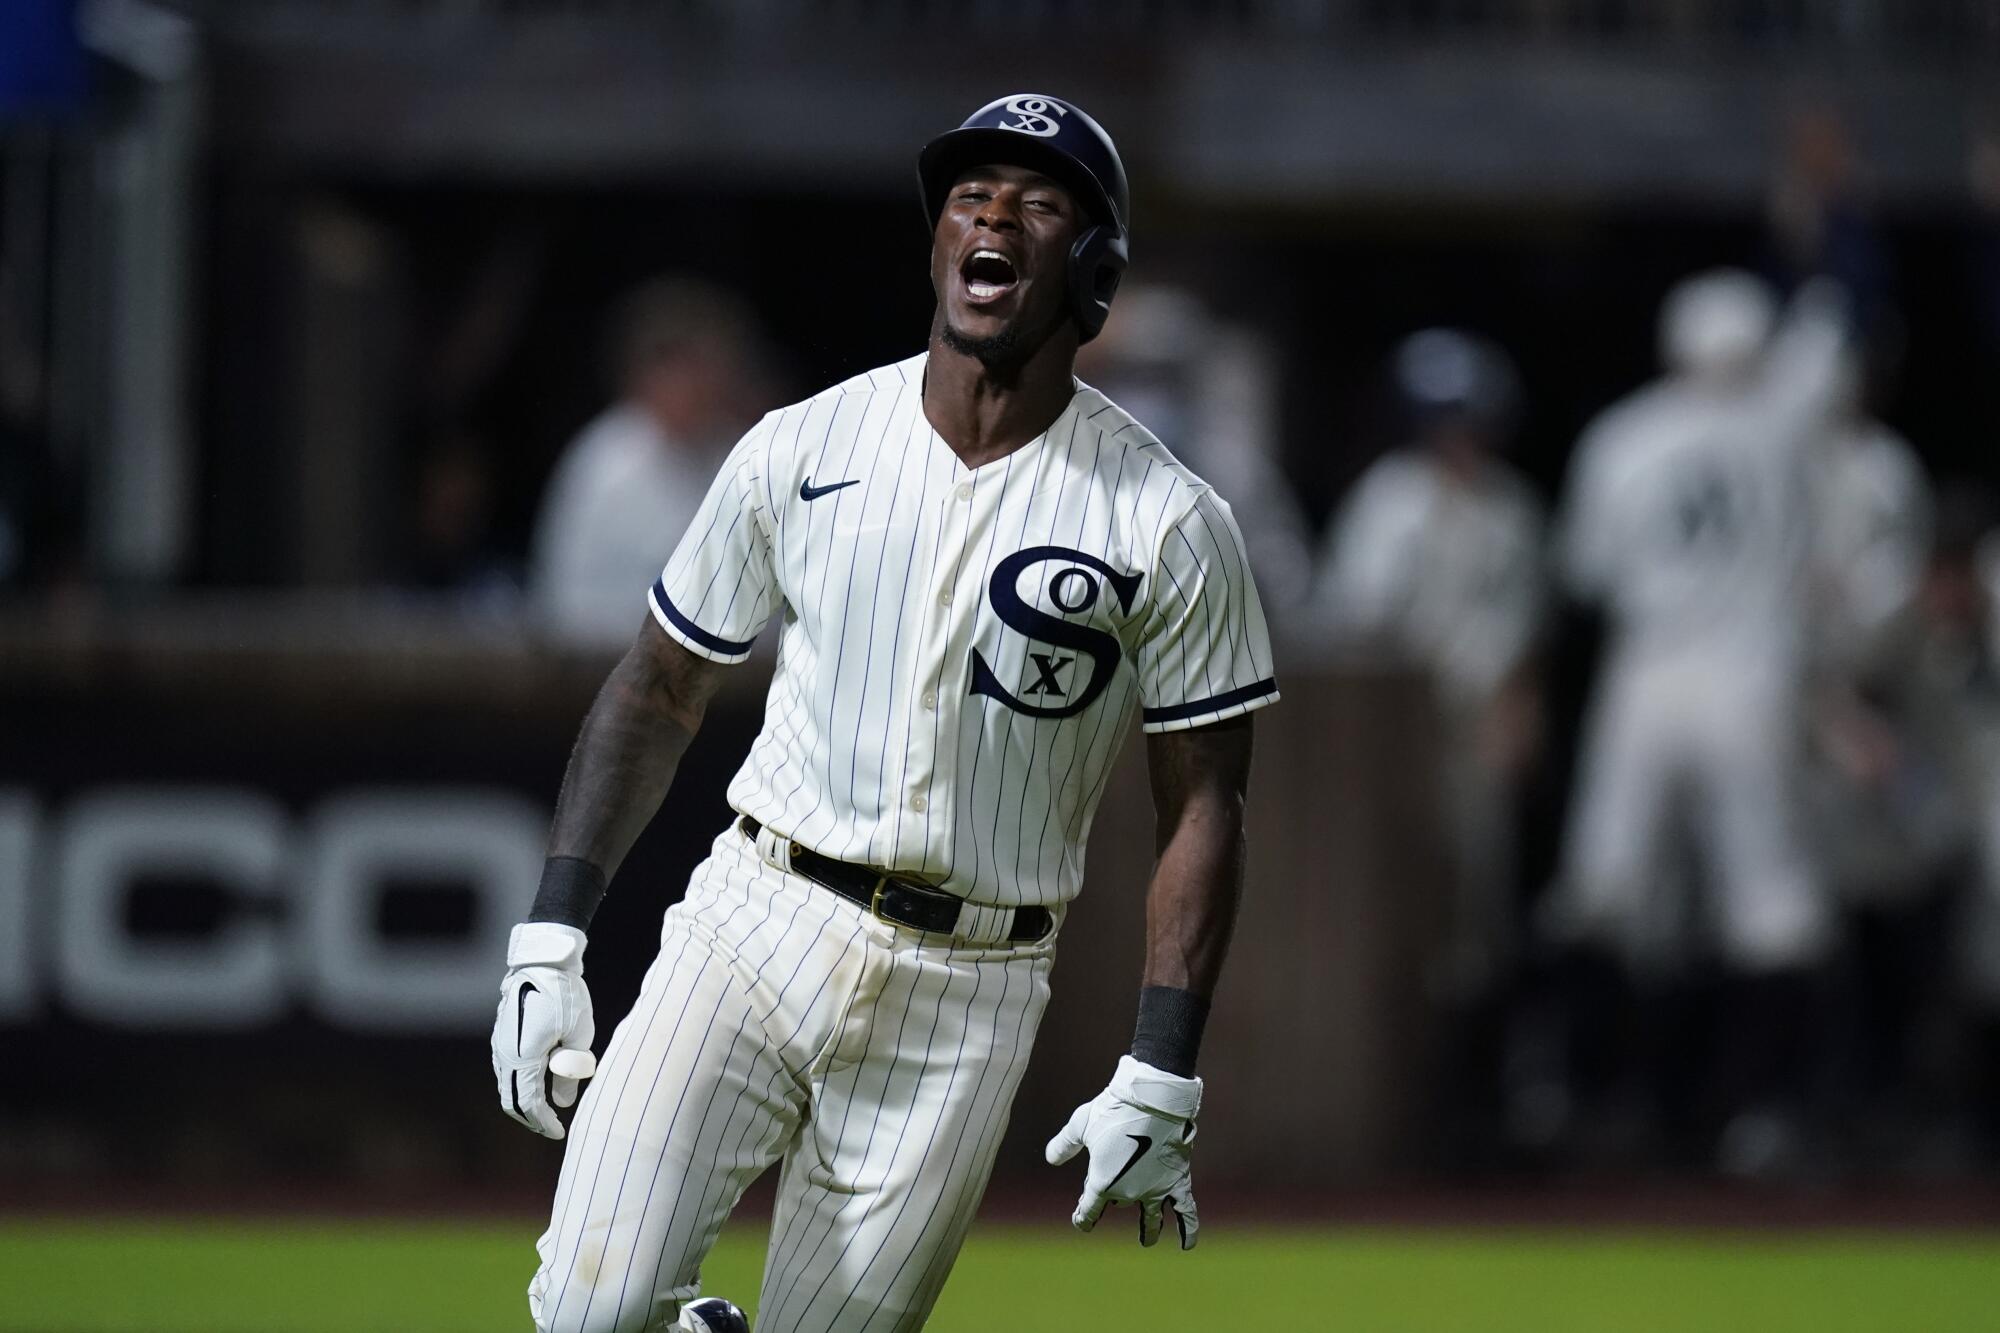 White Sox shortstop Tim Anderson celebrates his walk-off home run against the Yankees in the ninth inning.